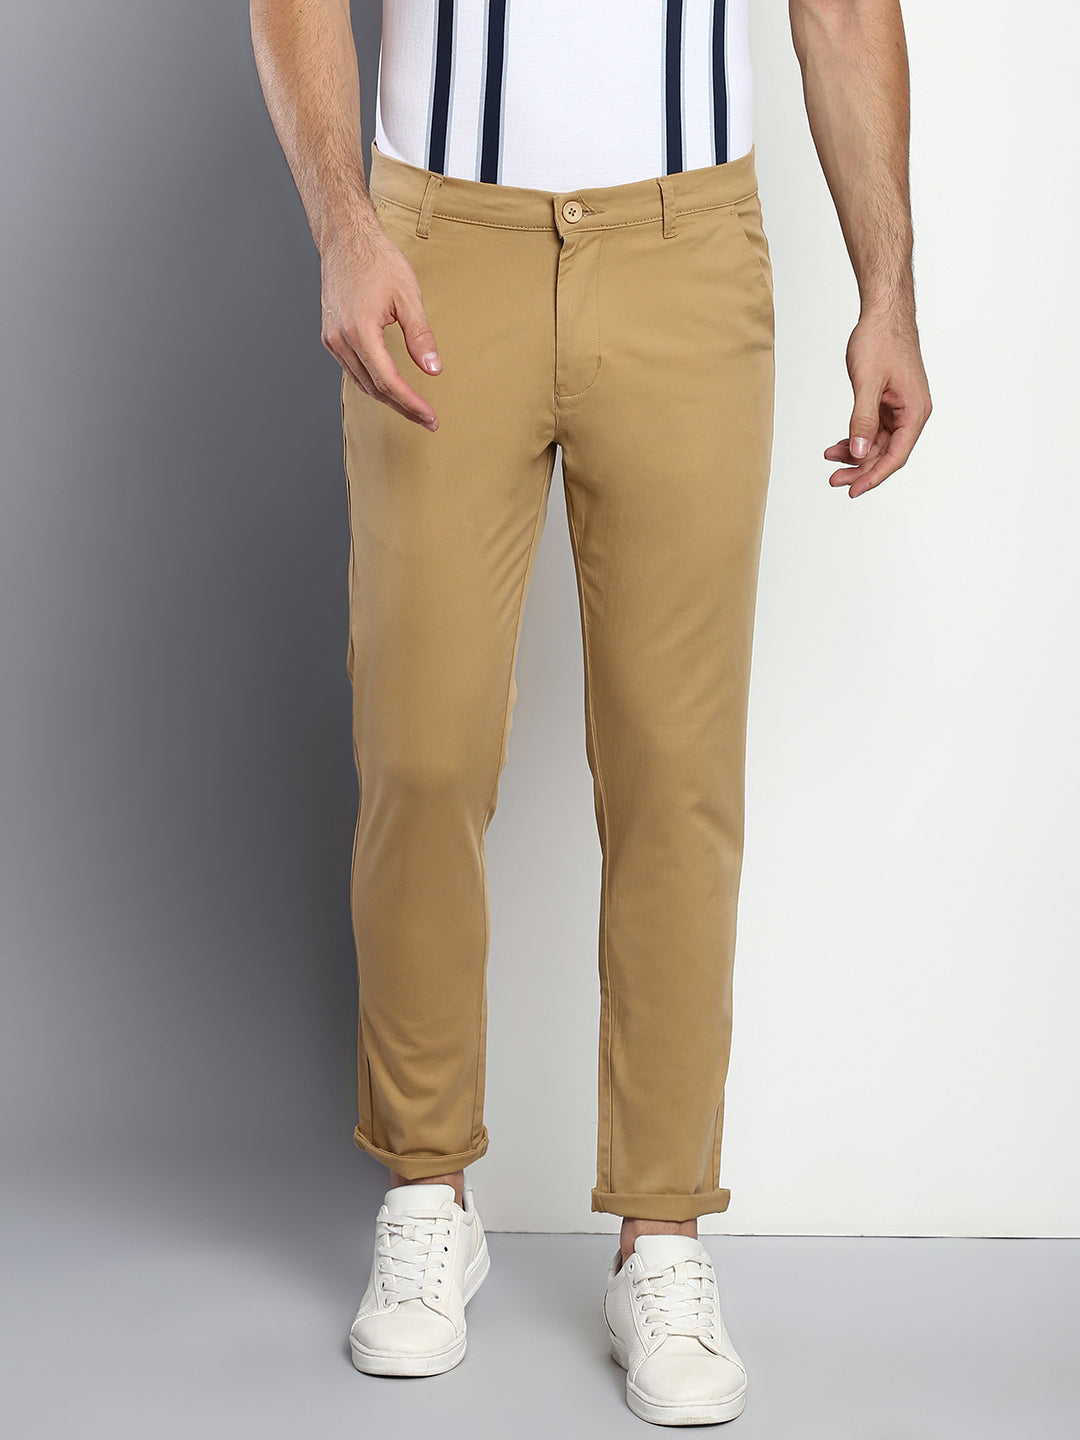 How to Wear Chinos with Style: 53 Outfit Ideas for Men